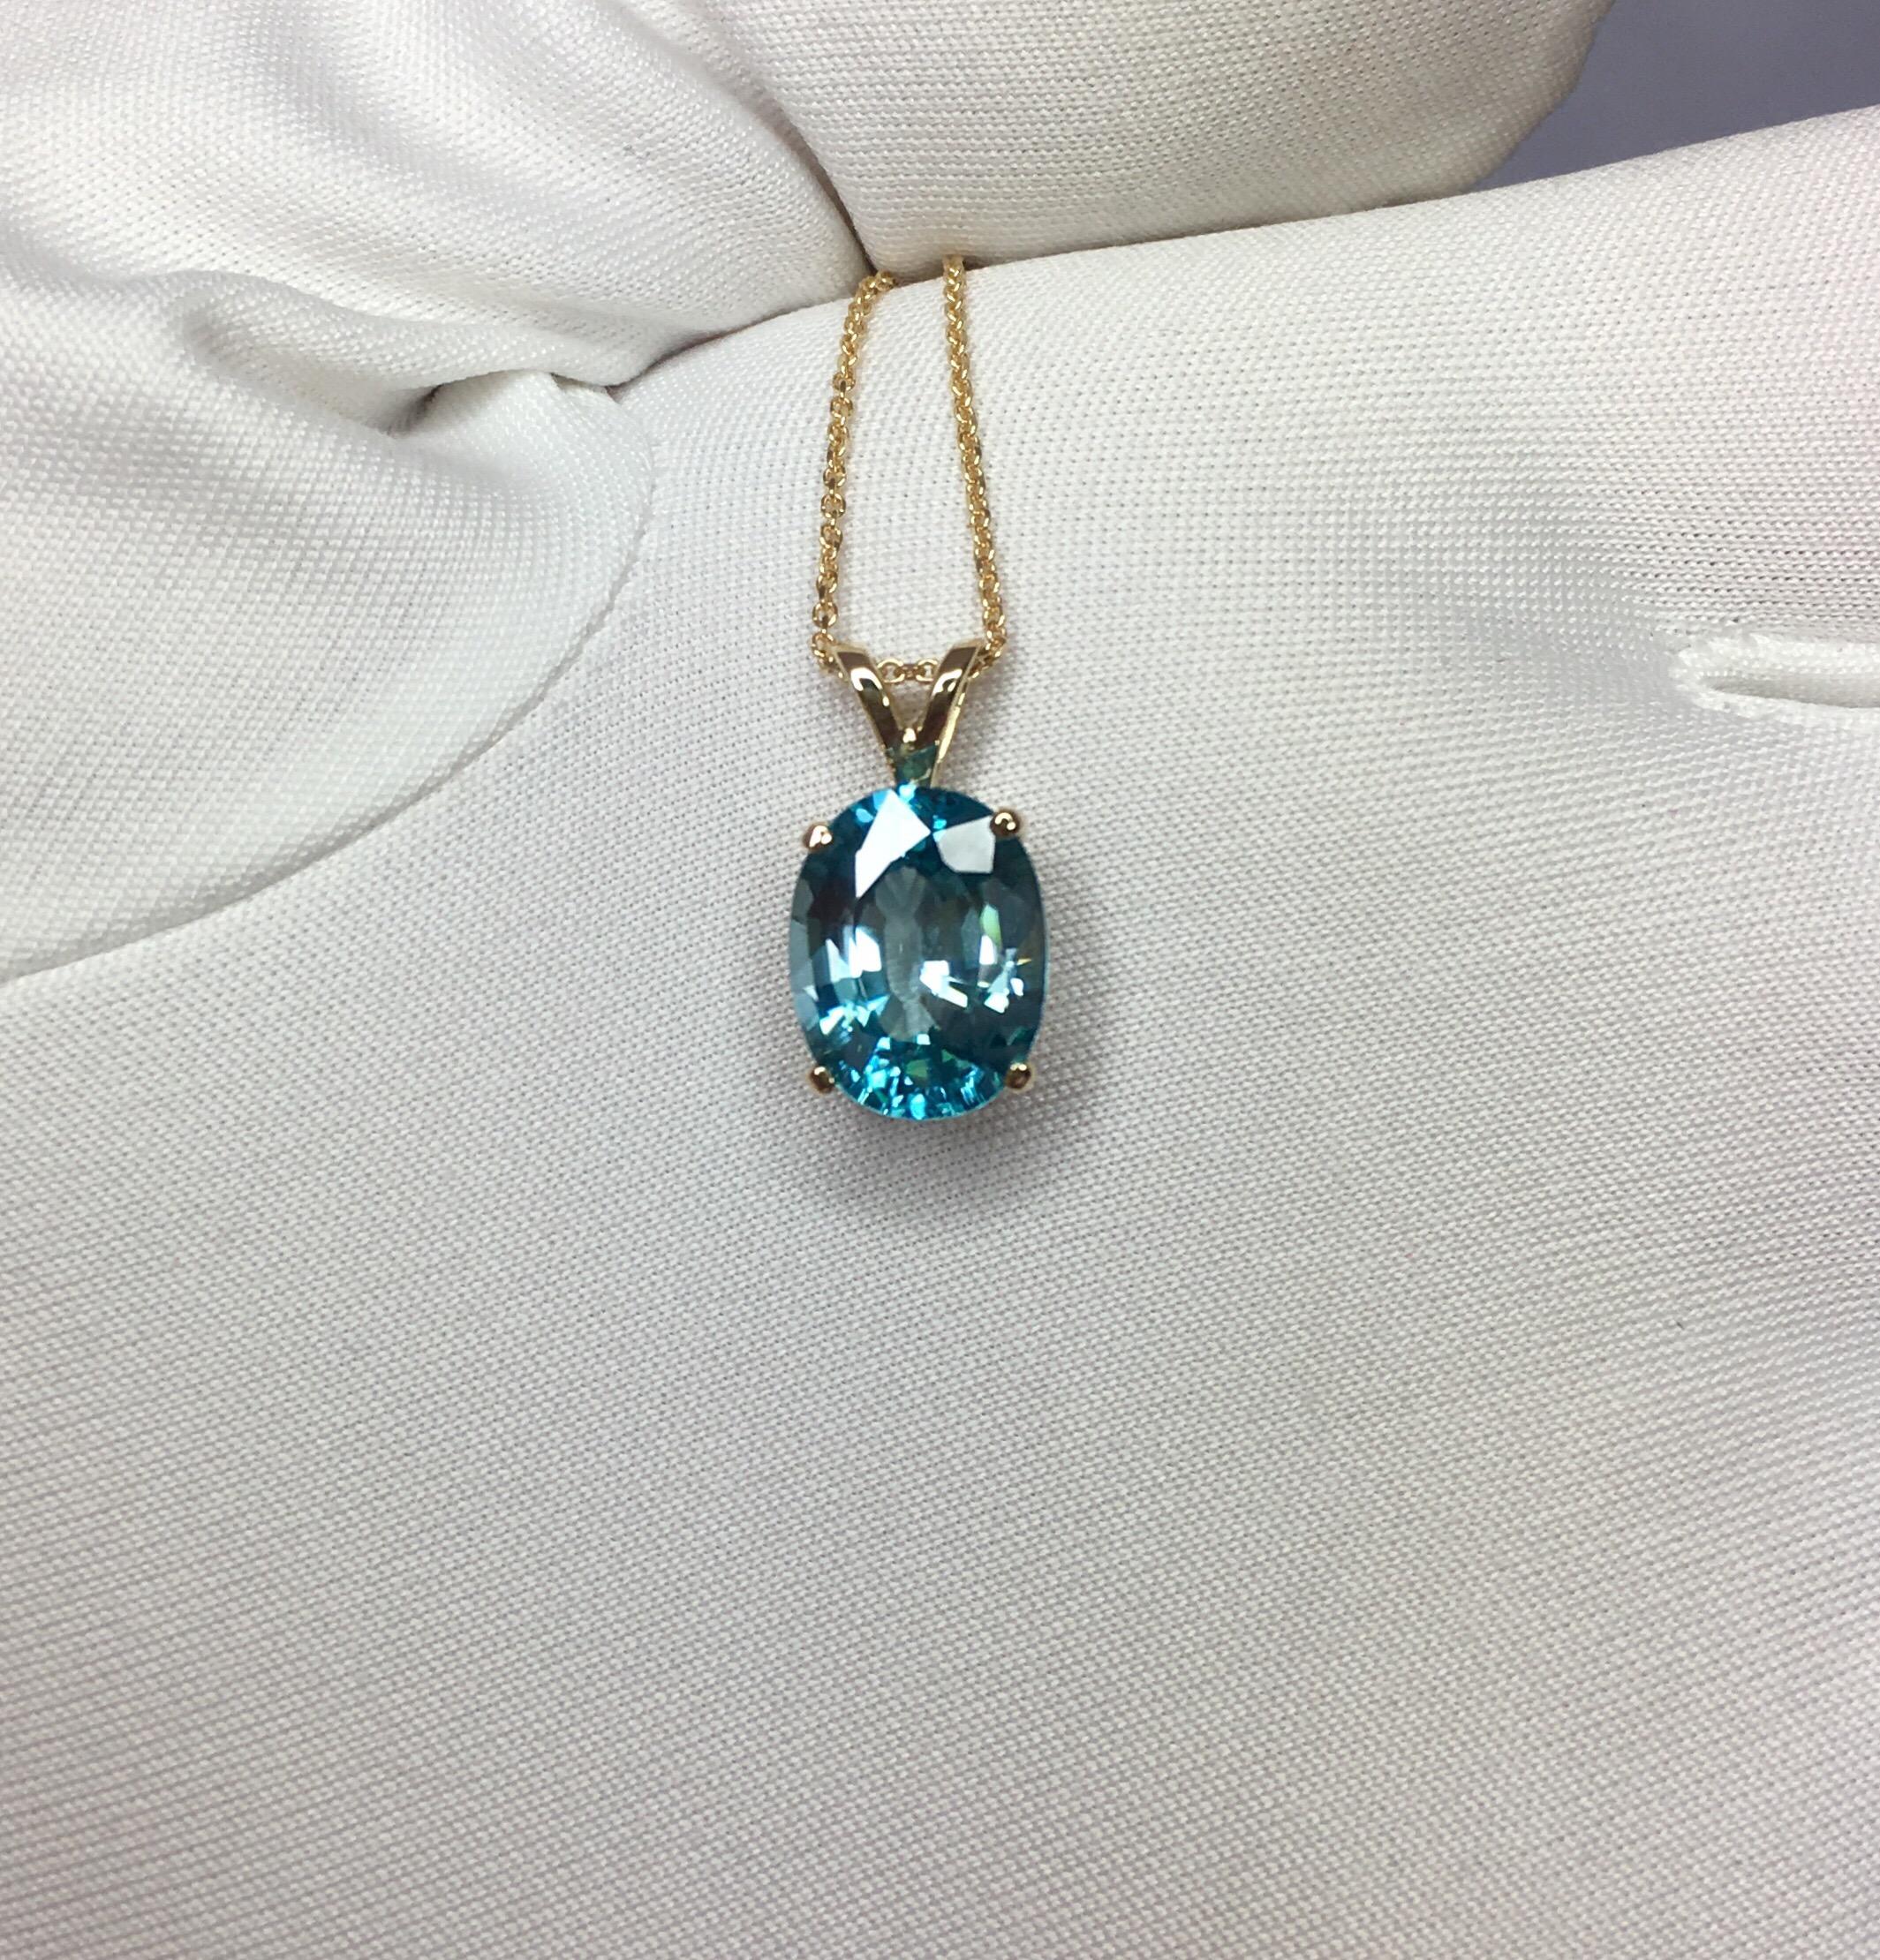 Beautiful natural large 4.31 carat blue zircon.
Set in a fine 14k yellow gold solitaire pendant.

Stunning blue zircon with a vivid neon blue colour and excellent clarity, practically flawless.

It also has an excellent oval cut which shows lots of